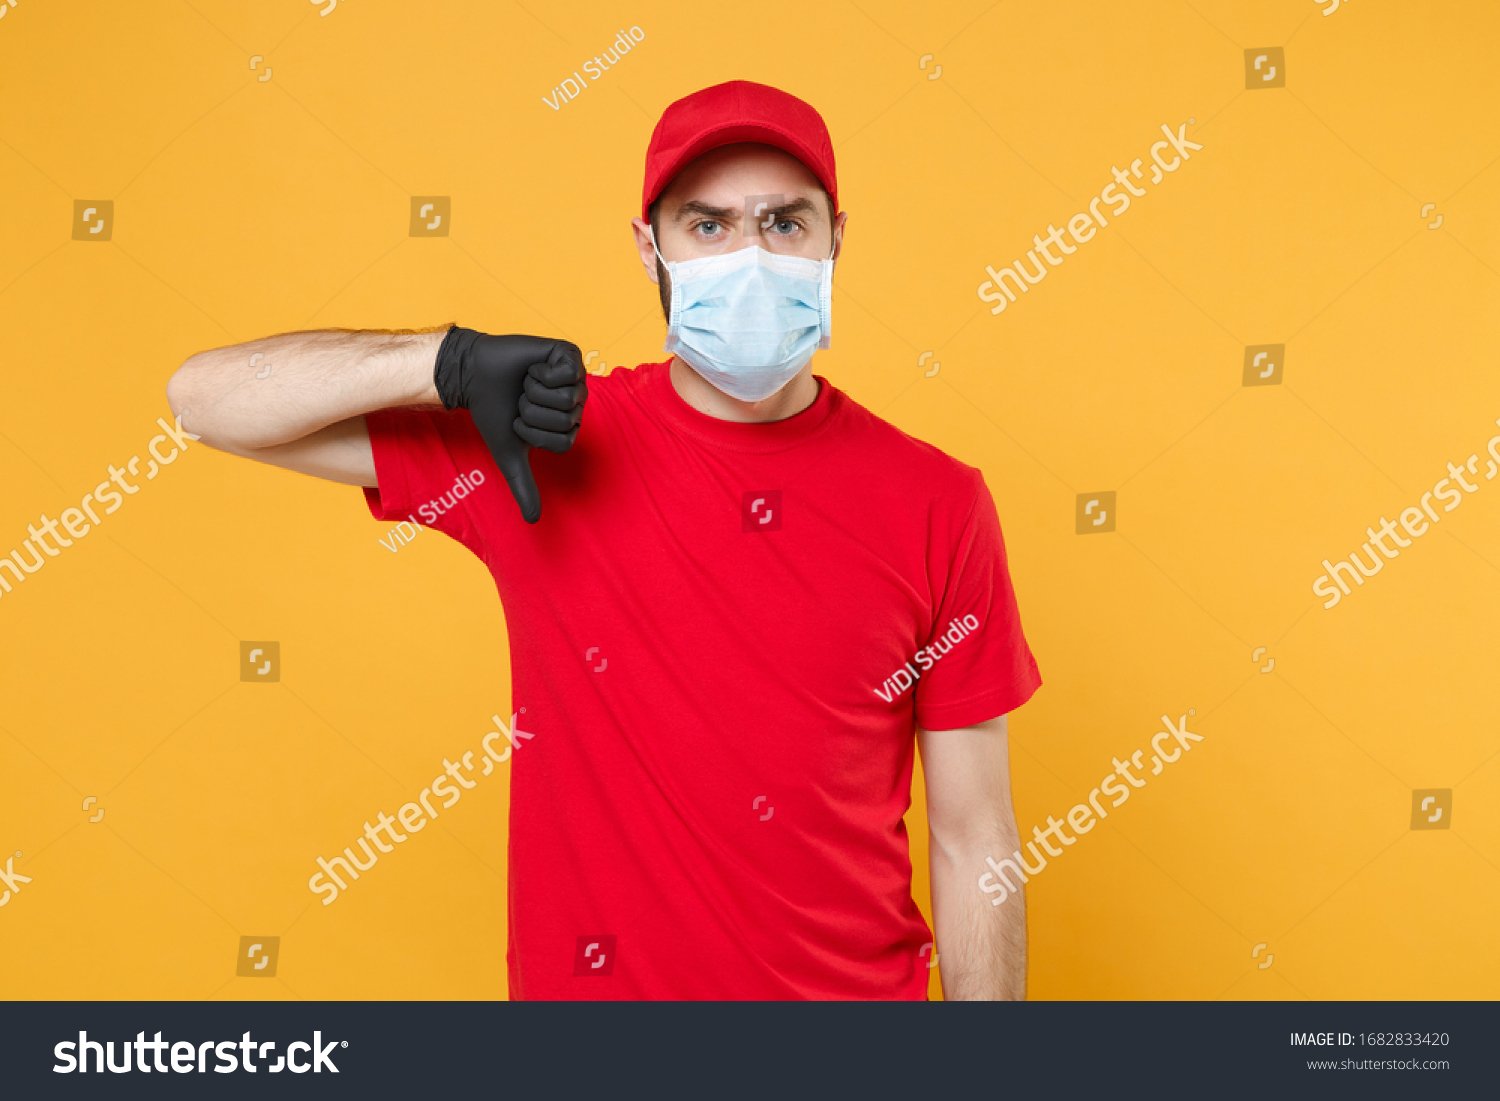 Delivery man in red cap blank t-shirt uniform sterile face mask gloves isolated on yellow background studio Guy employee working courier Service quarantine pandemic coronavirus virus concept #1682833420